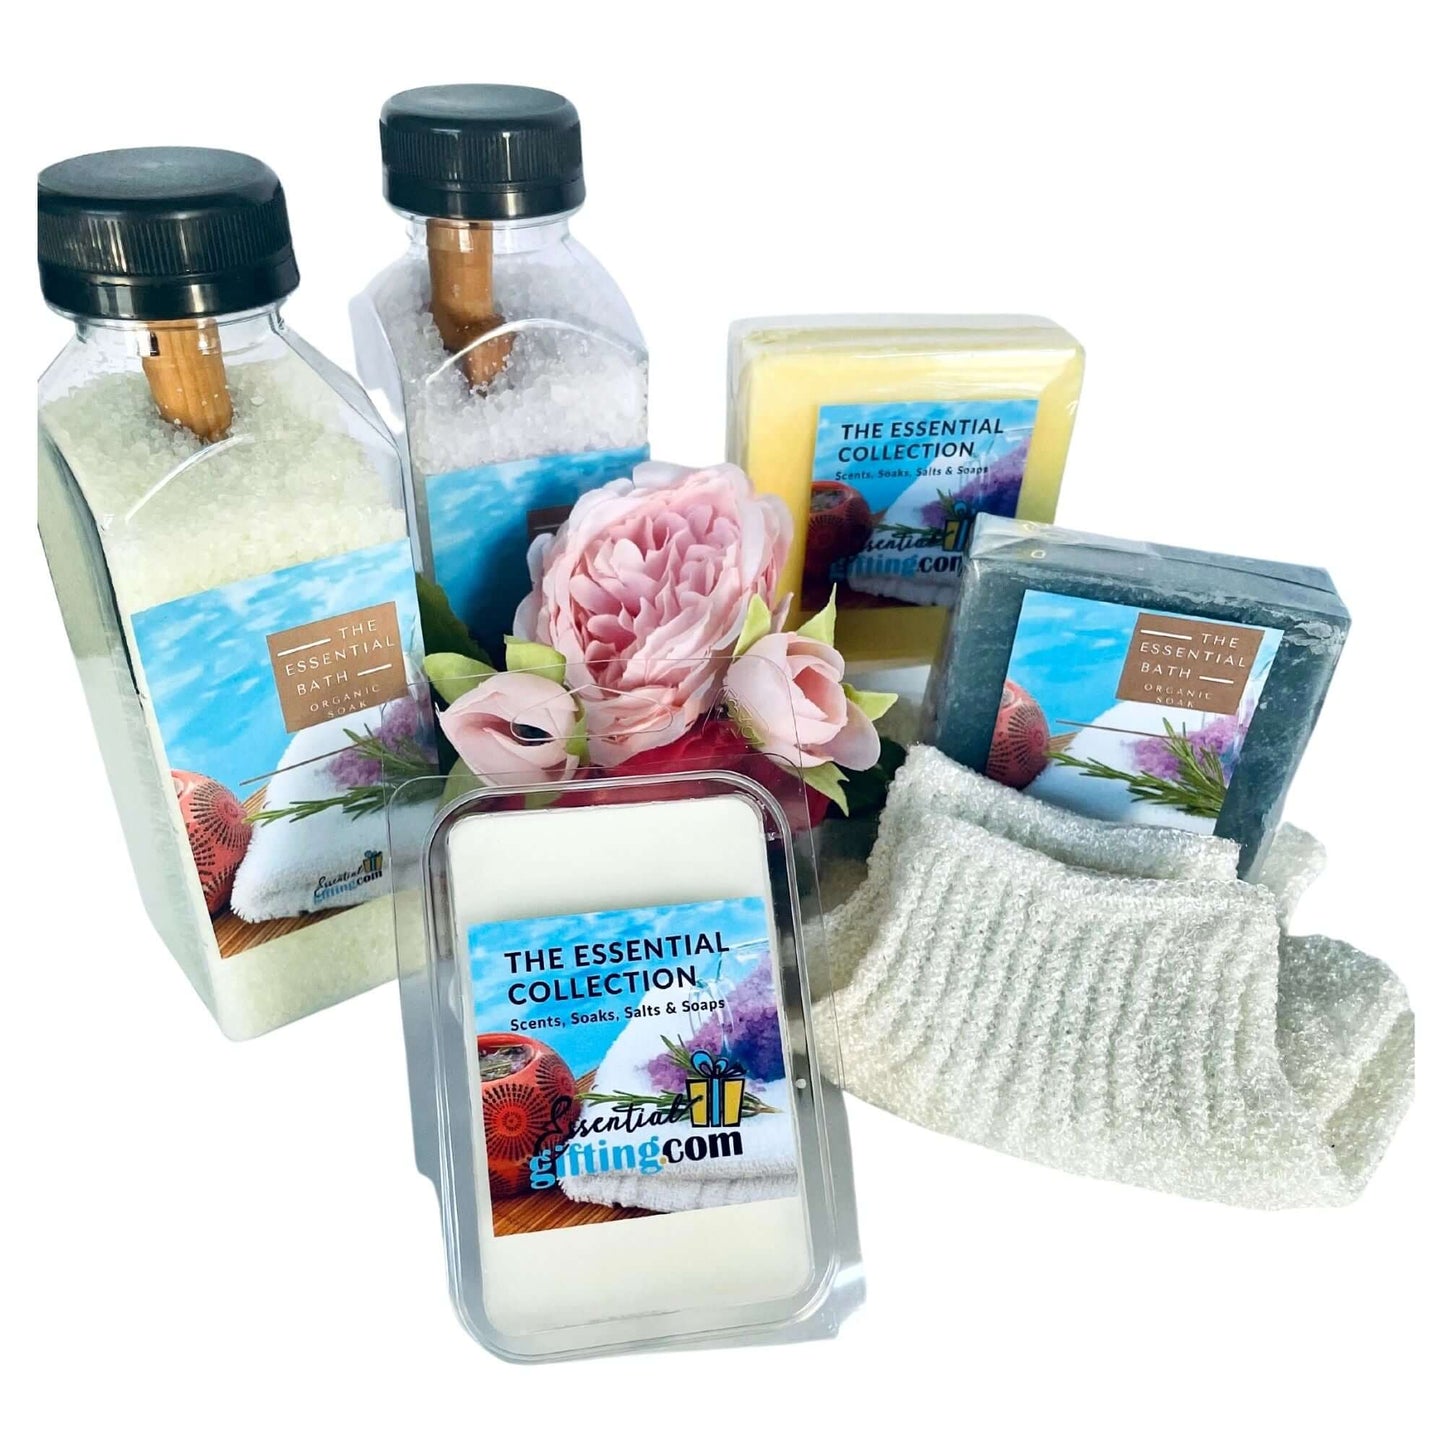 Luxurious bath care essentials in artisan gift box, featuring bath salts, soap, and other pampering products.